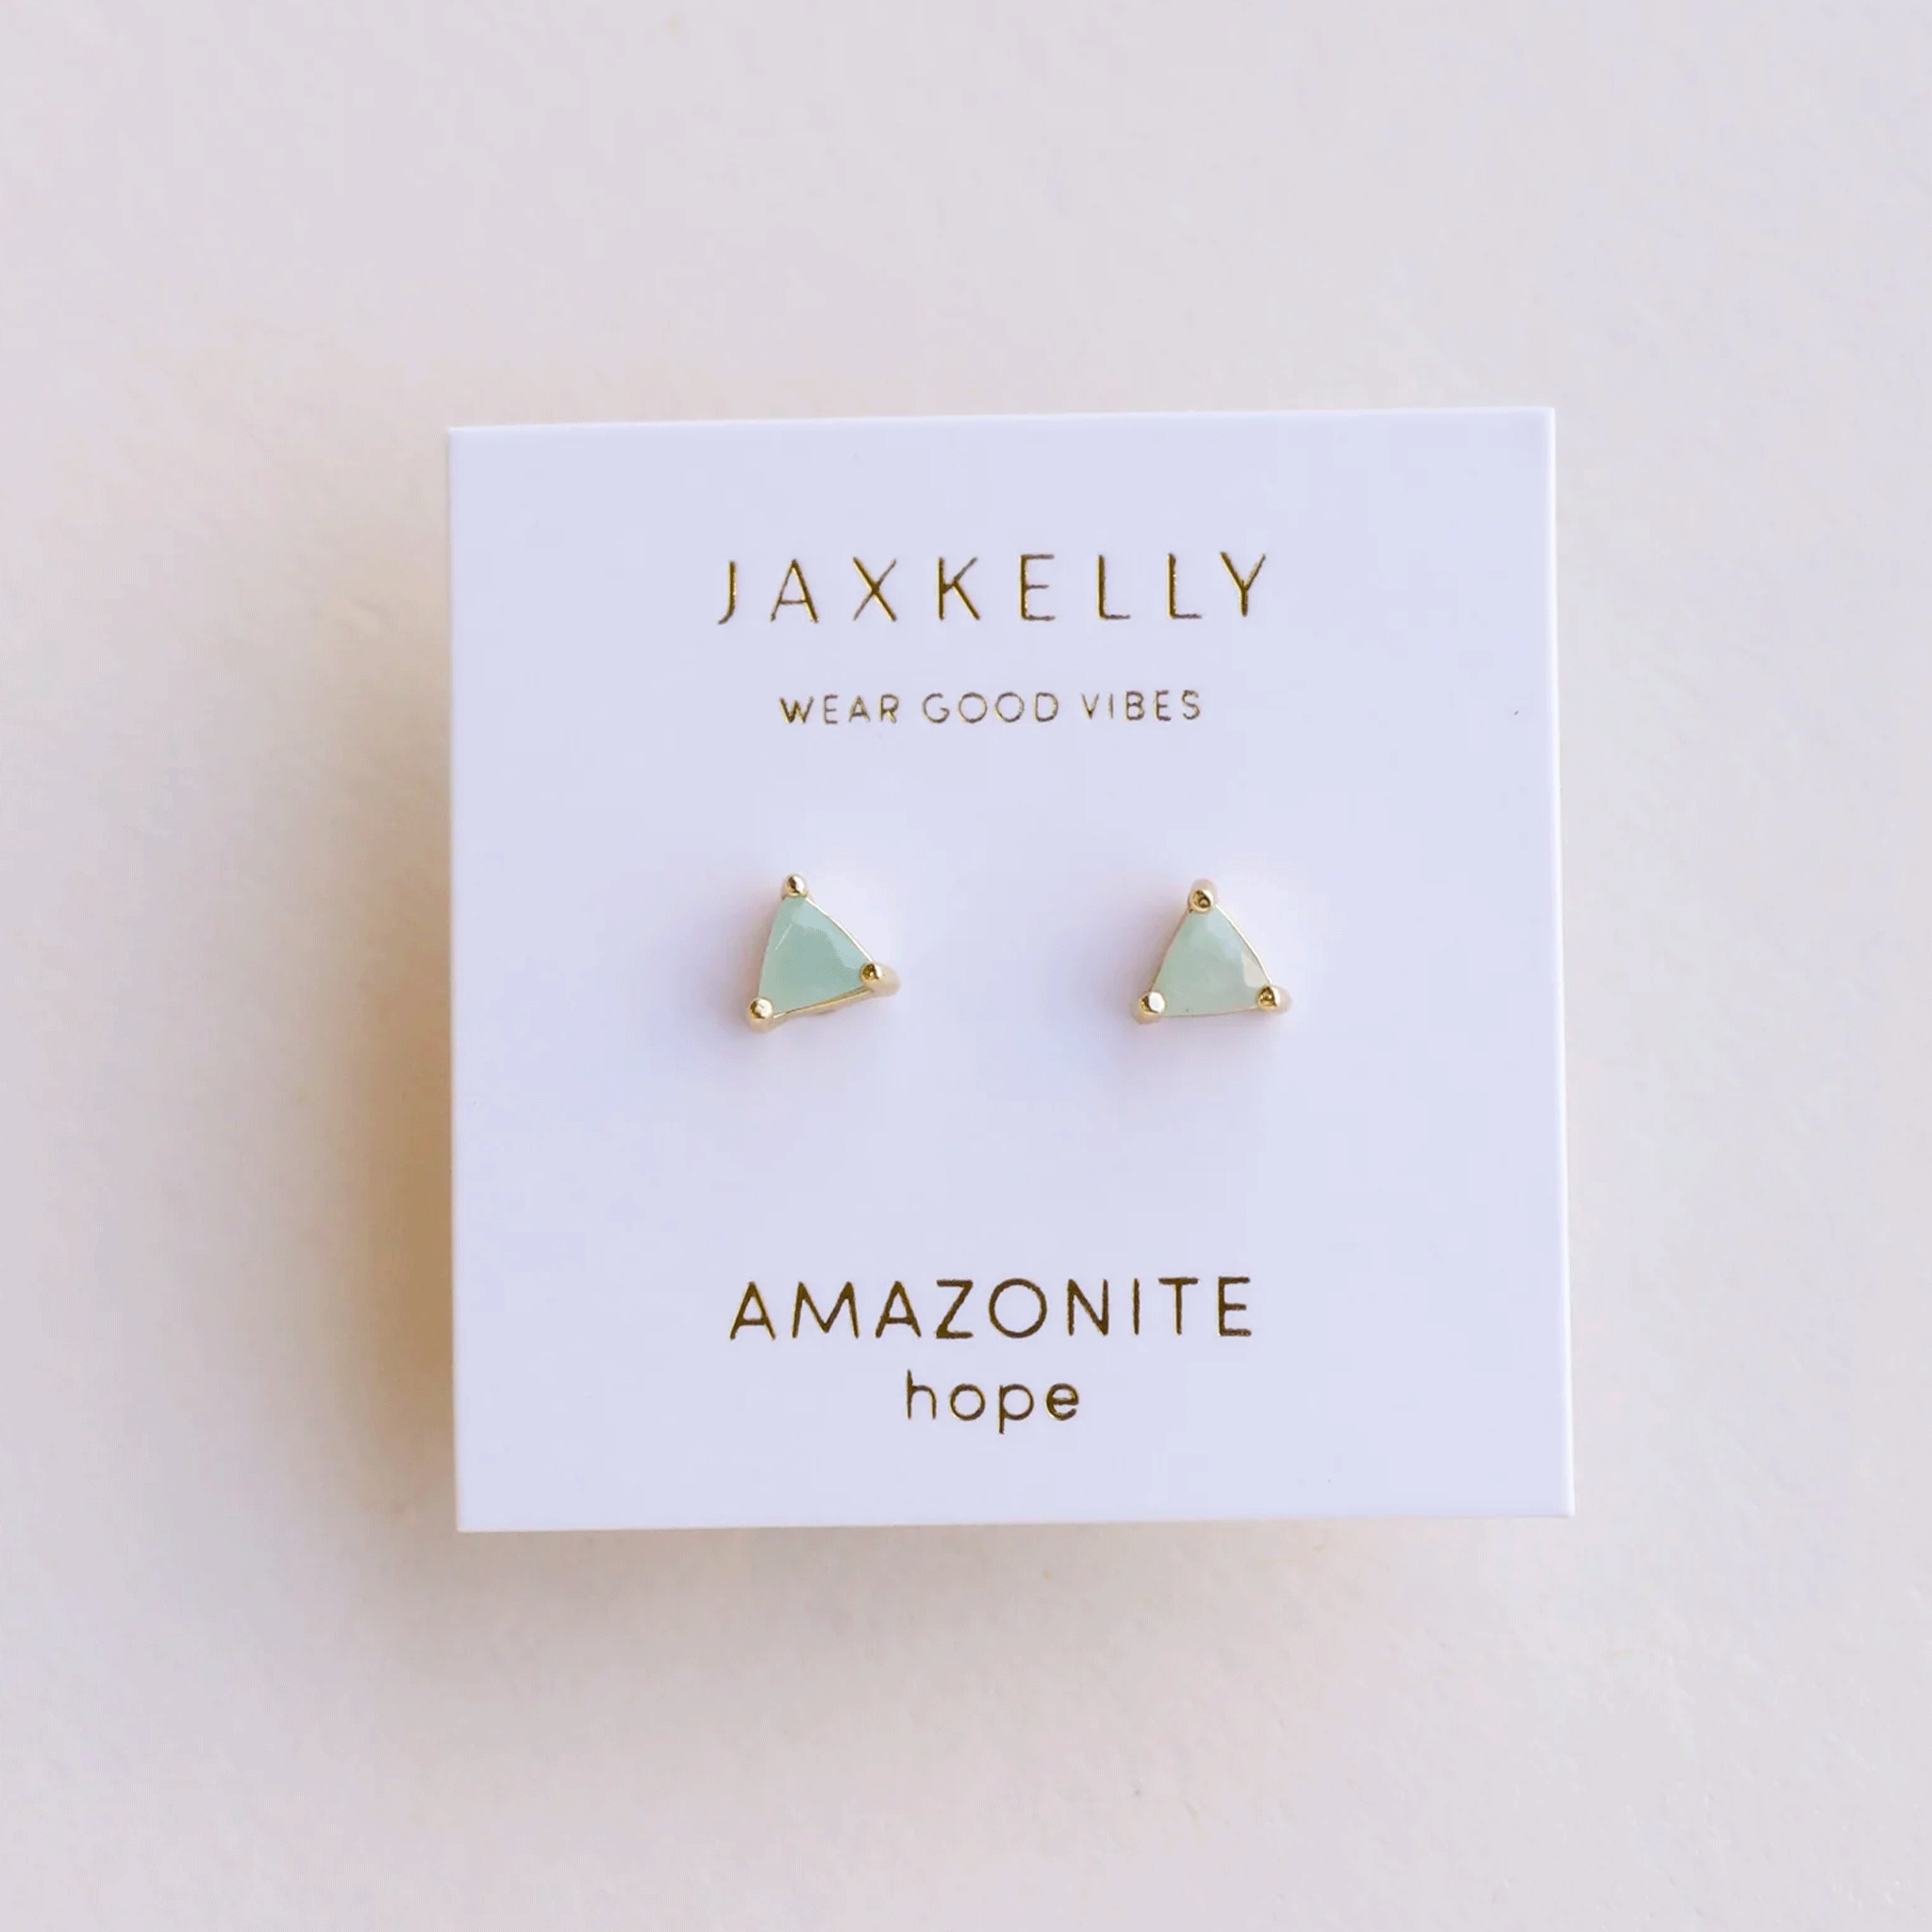 On a cream background is a white square piece of packaging holding a pair of green and gold amazonite stud earrings in a triangle shape along with gold text on the packaging that reads, "JaxKelly Wear Good Vibes Amazonite hope".